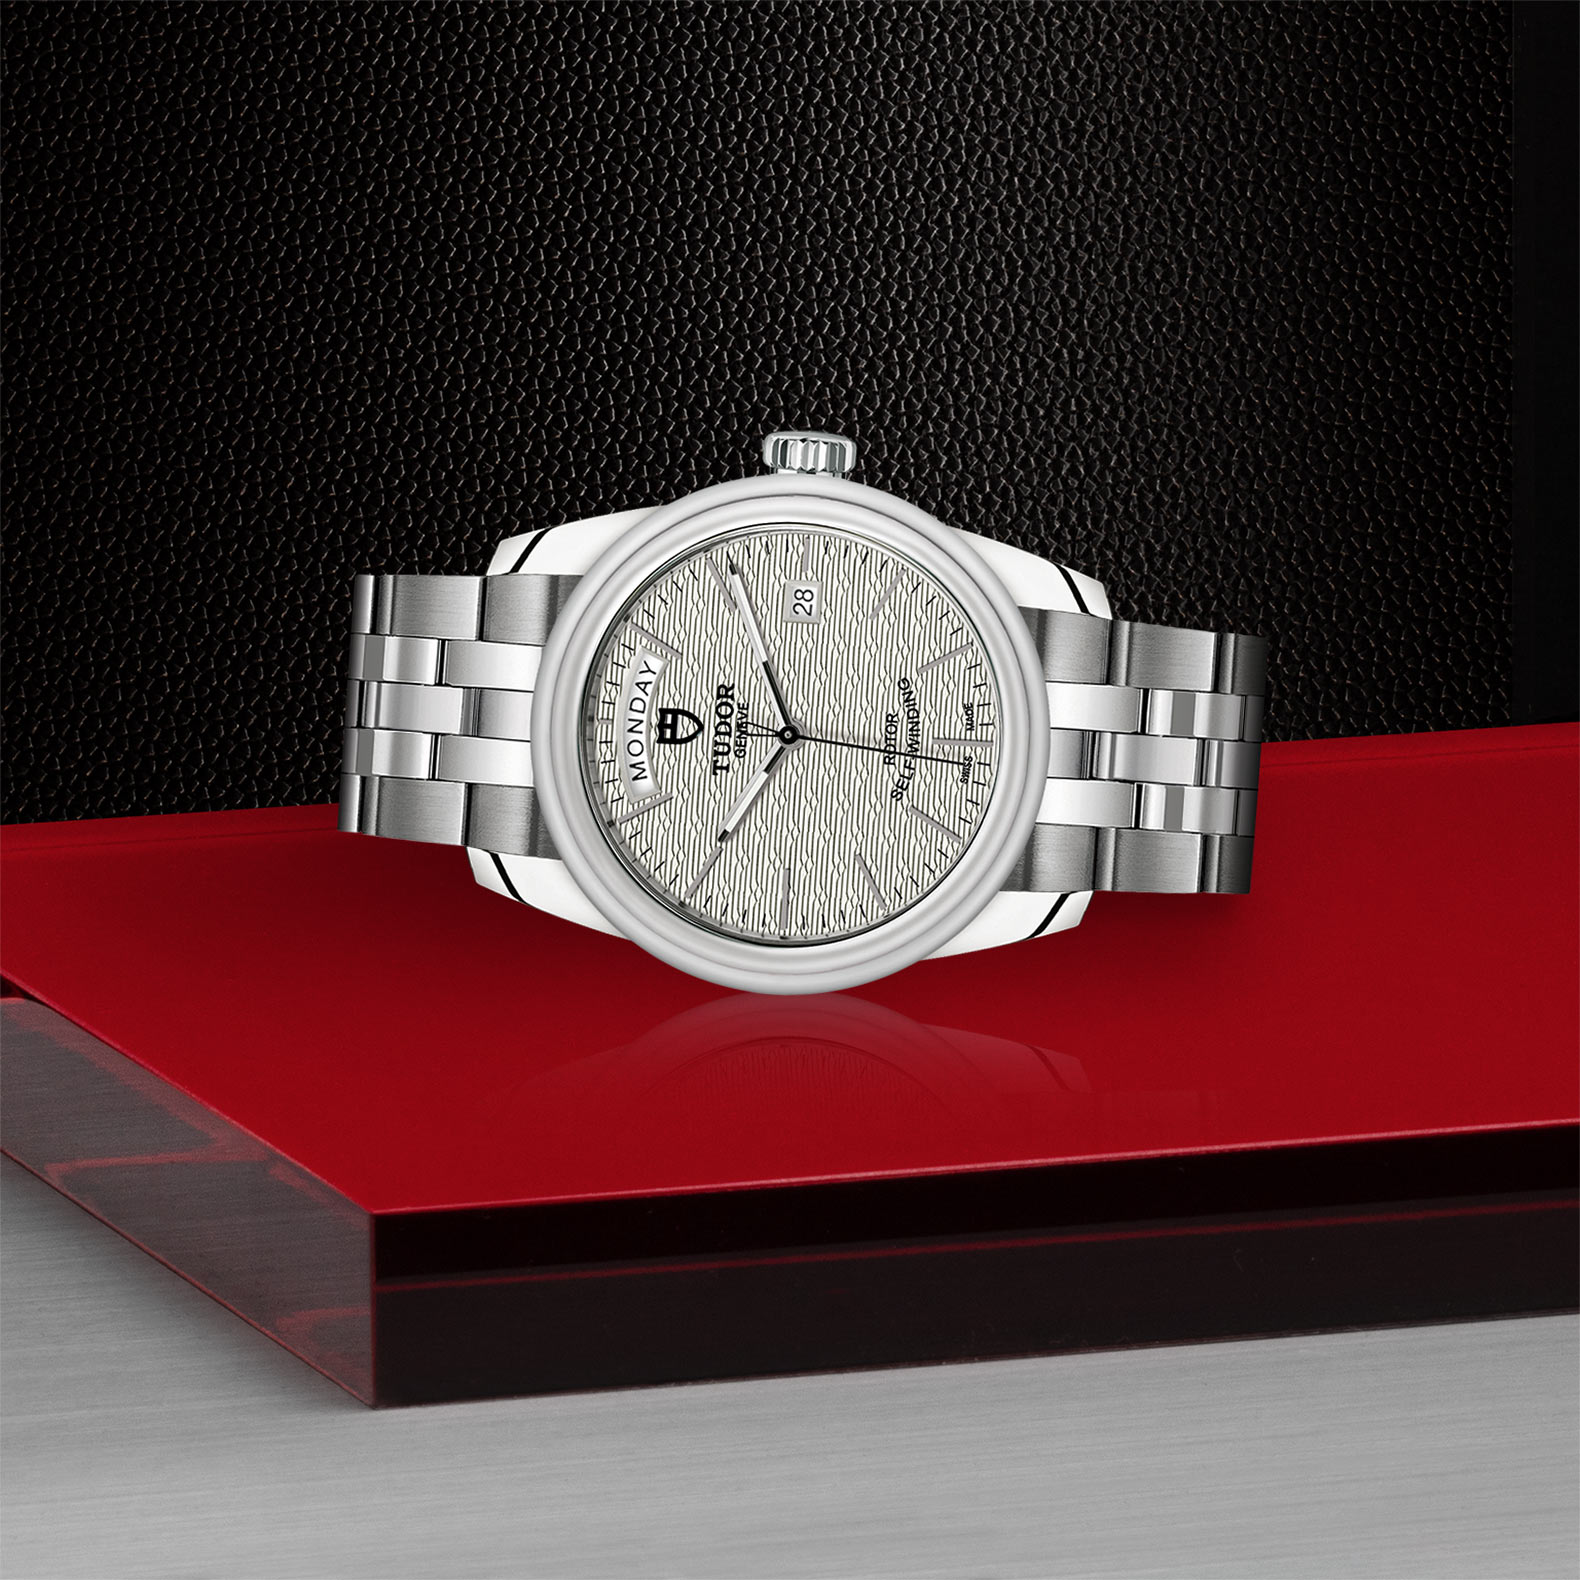 Tudor Glamour Date+Day M56000-0003